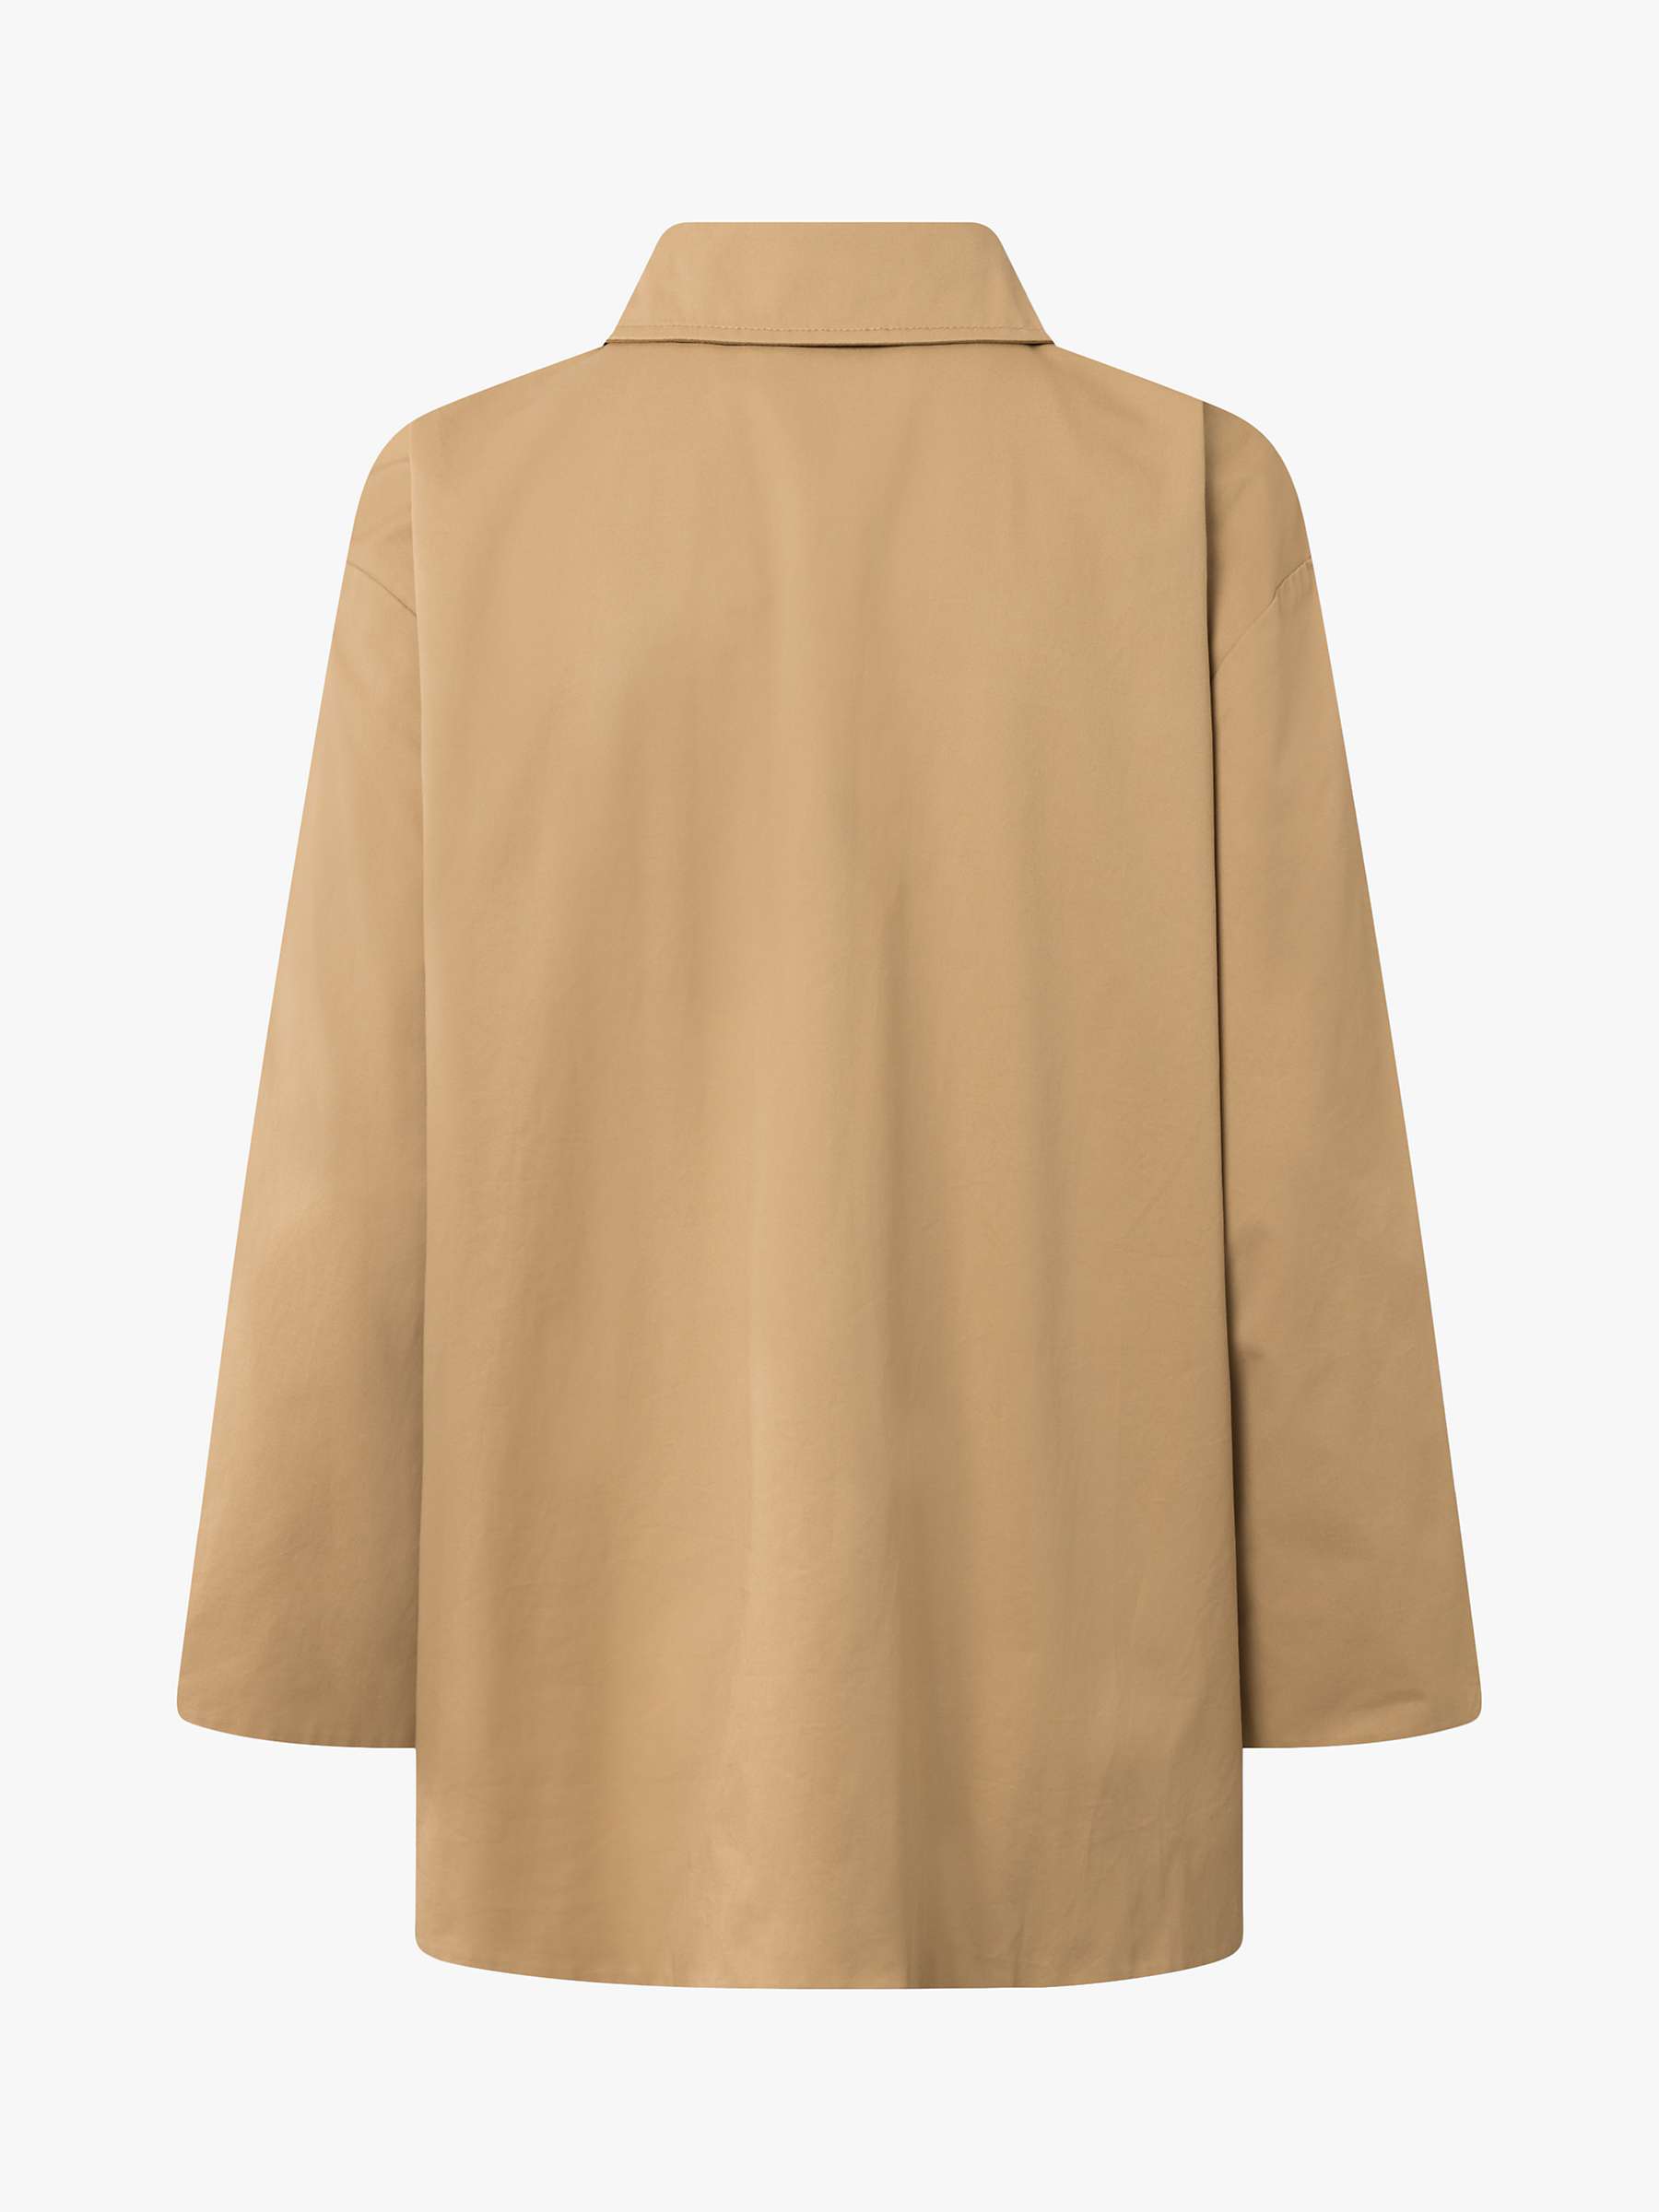 Buy Lovechild 1979 Ailani Double Breasted Jacket, Dark Sand Online at johnlewis.com